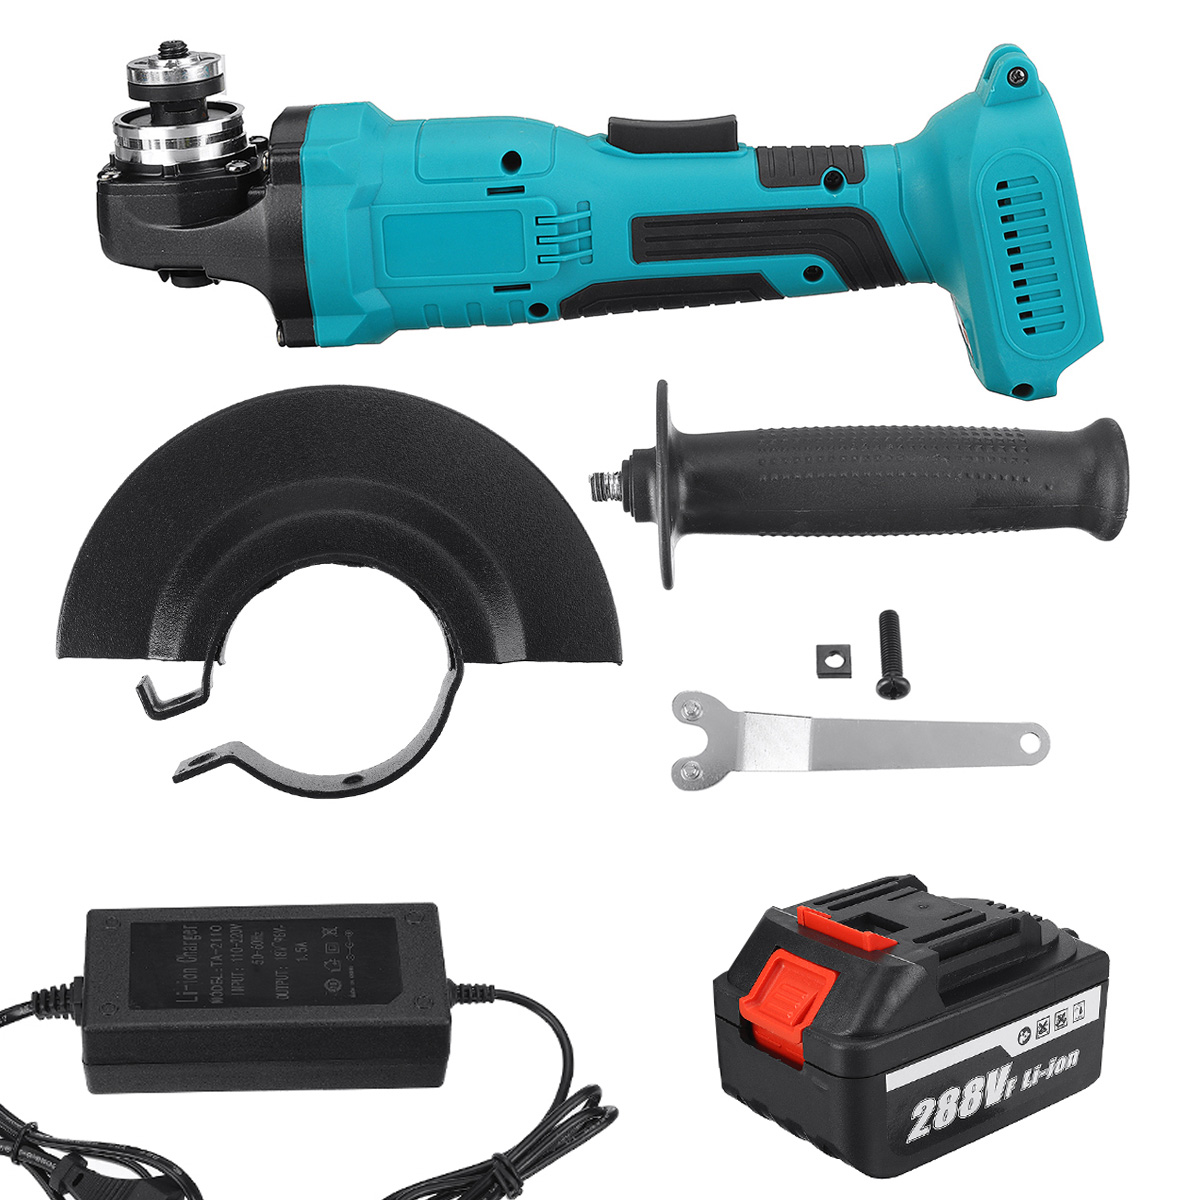 100125mm-Brushless-Cordless-Angle-Grinder-Polisher-Cutting-Tool-W-None12-Battery-For-Makita-1867833-7